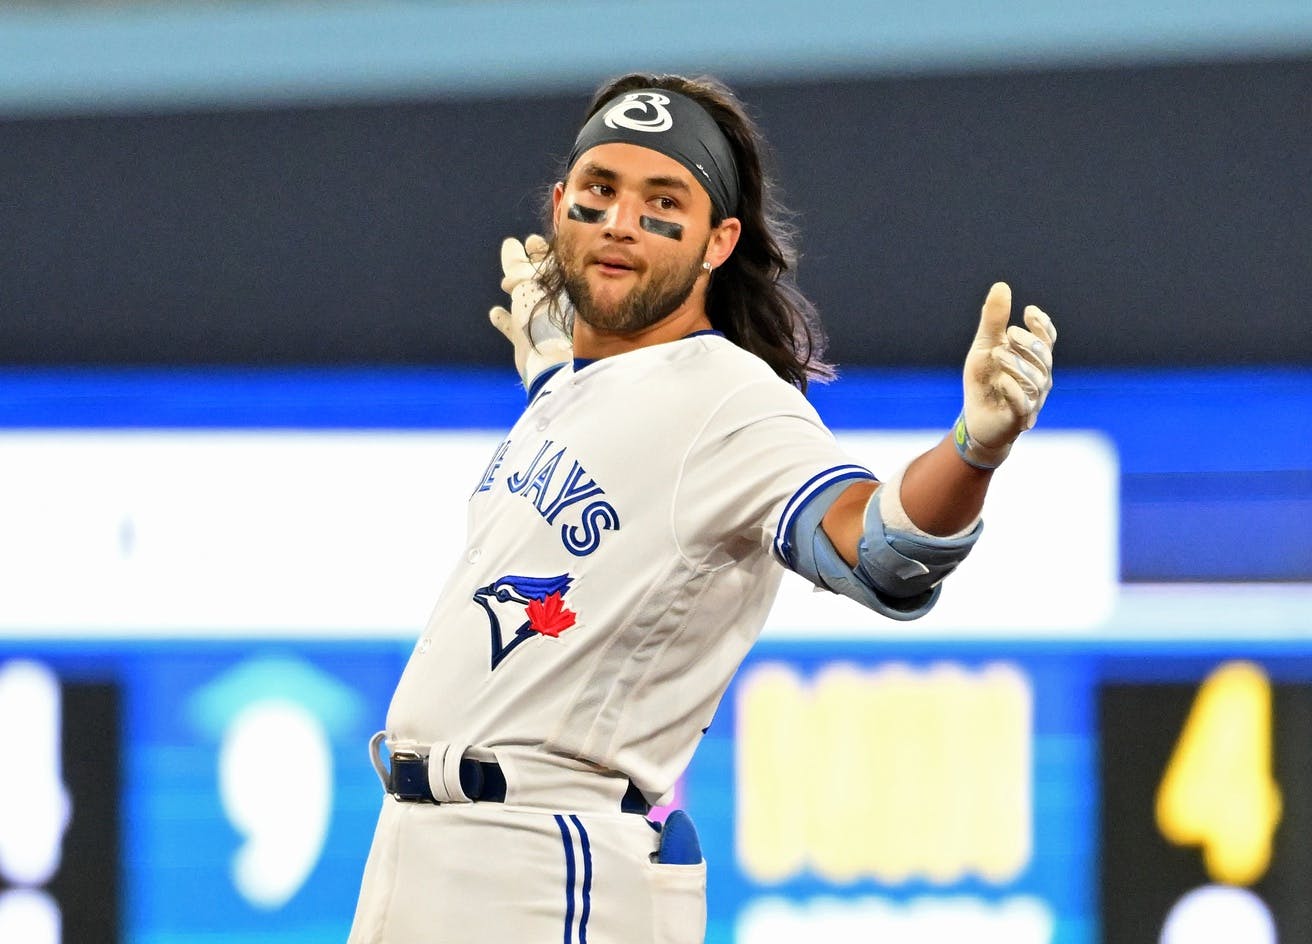 Bo Bichette becomes the fastest Blue Jay to 500 hits as Blue Jays